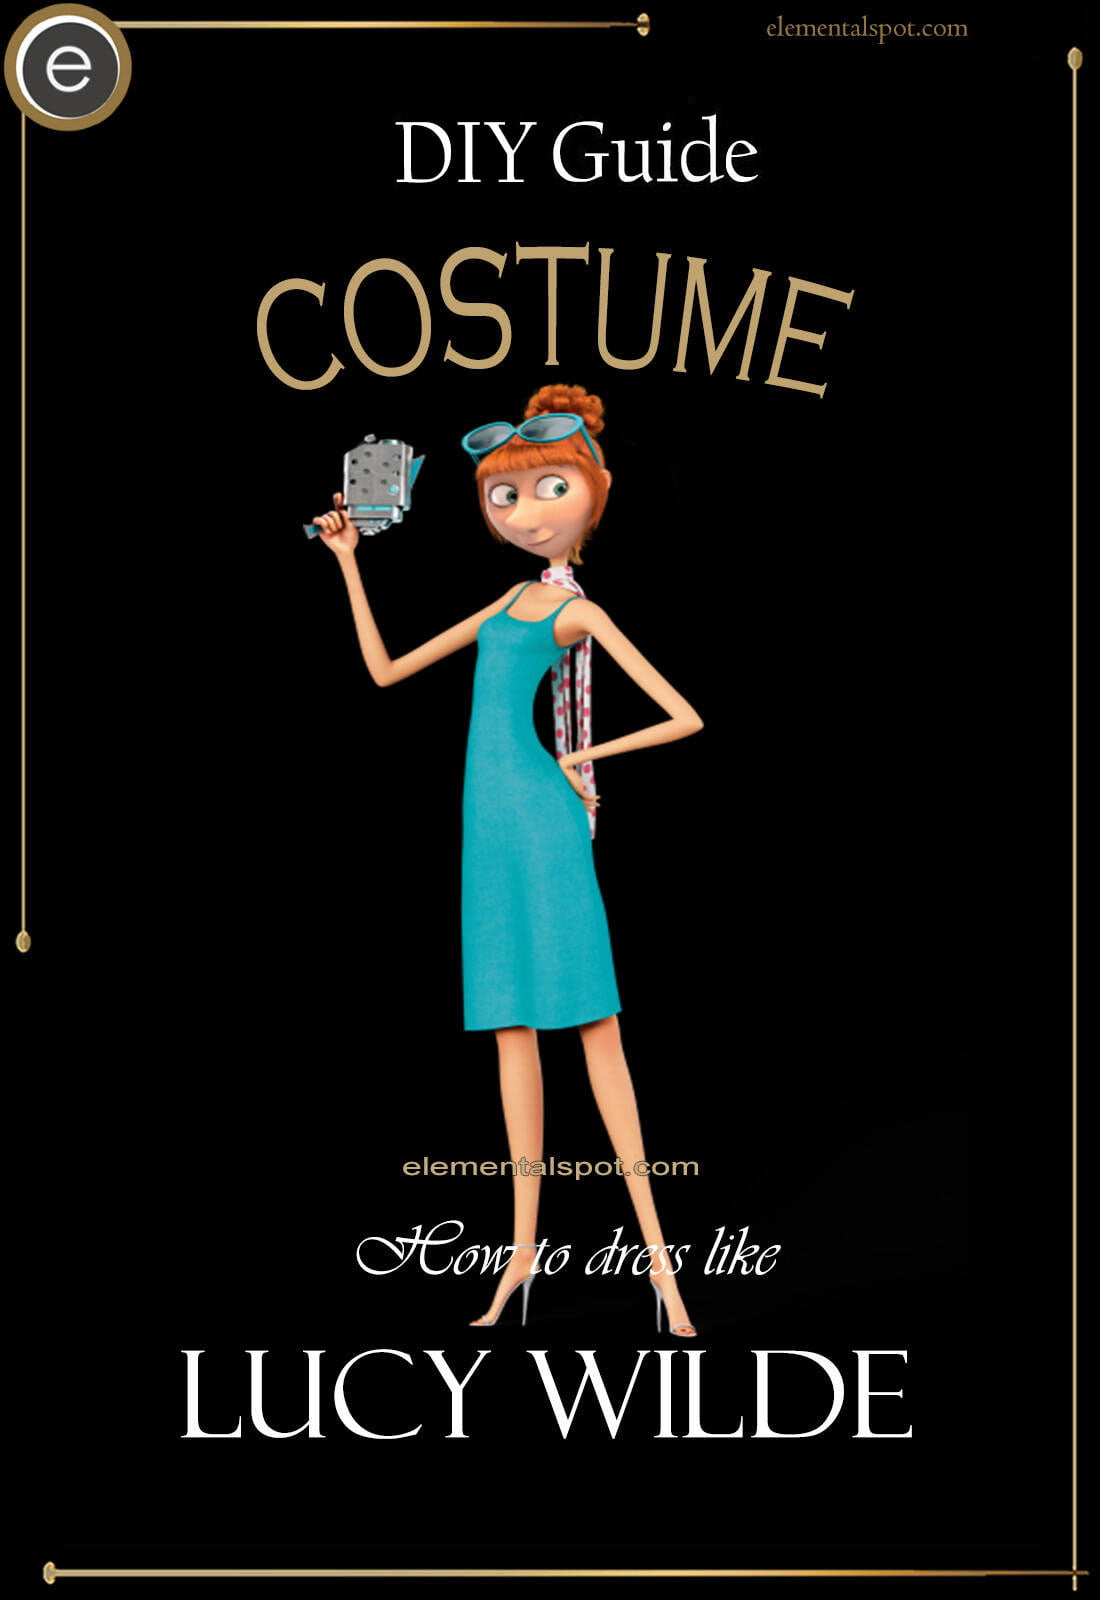 Dress Up Like Lucy Wilde from Despicable Me - Elemental Spot